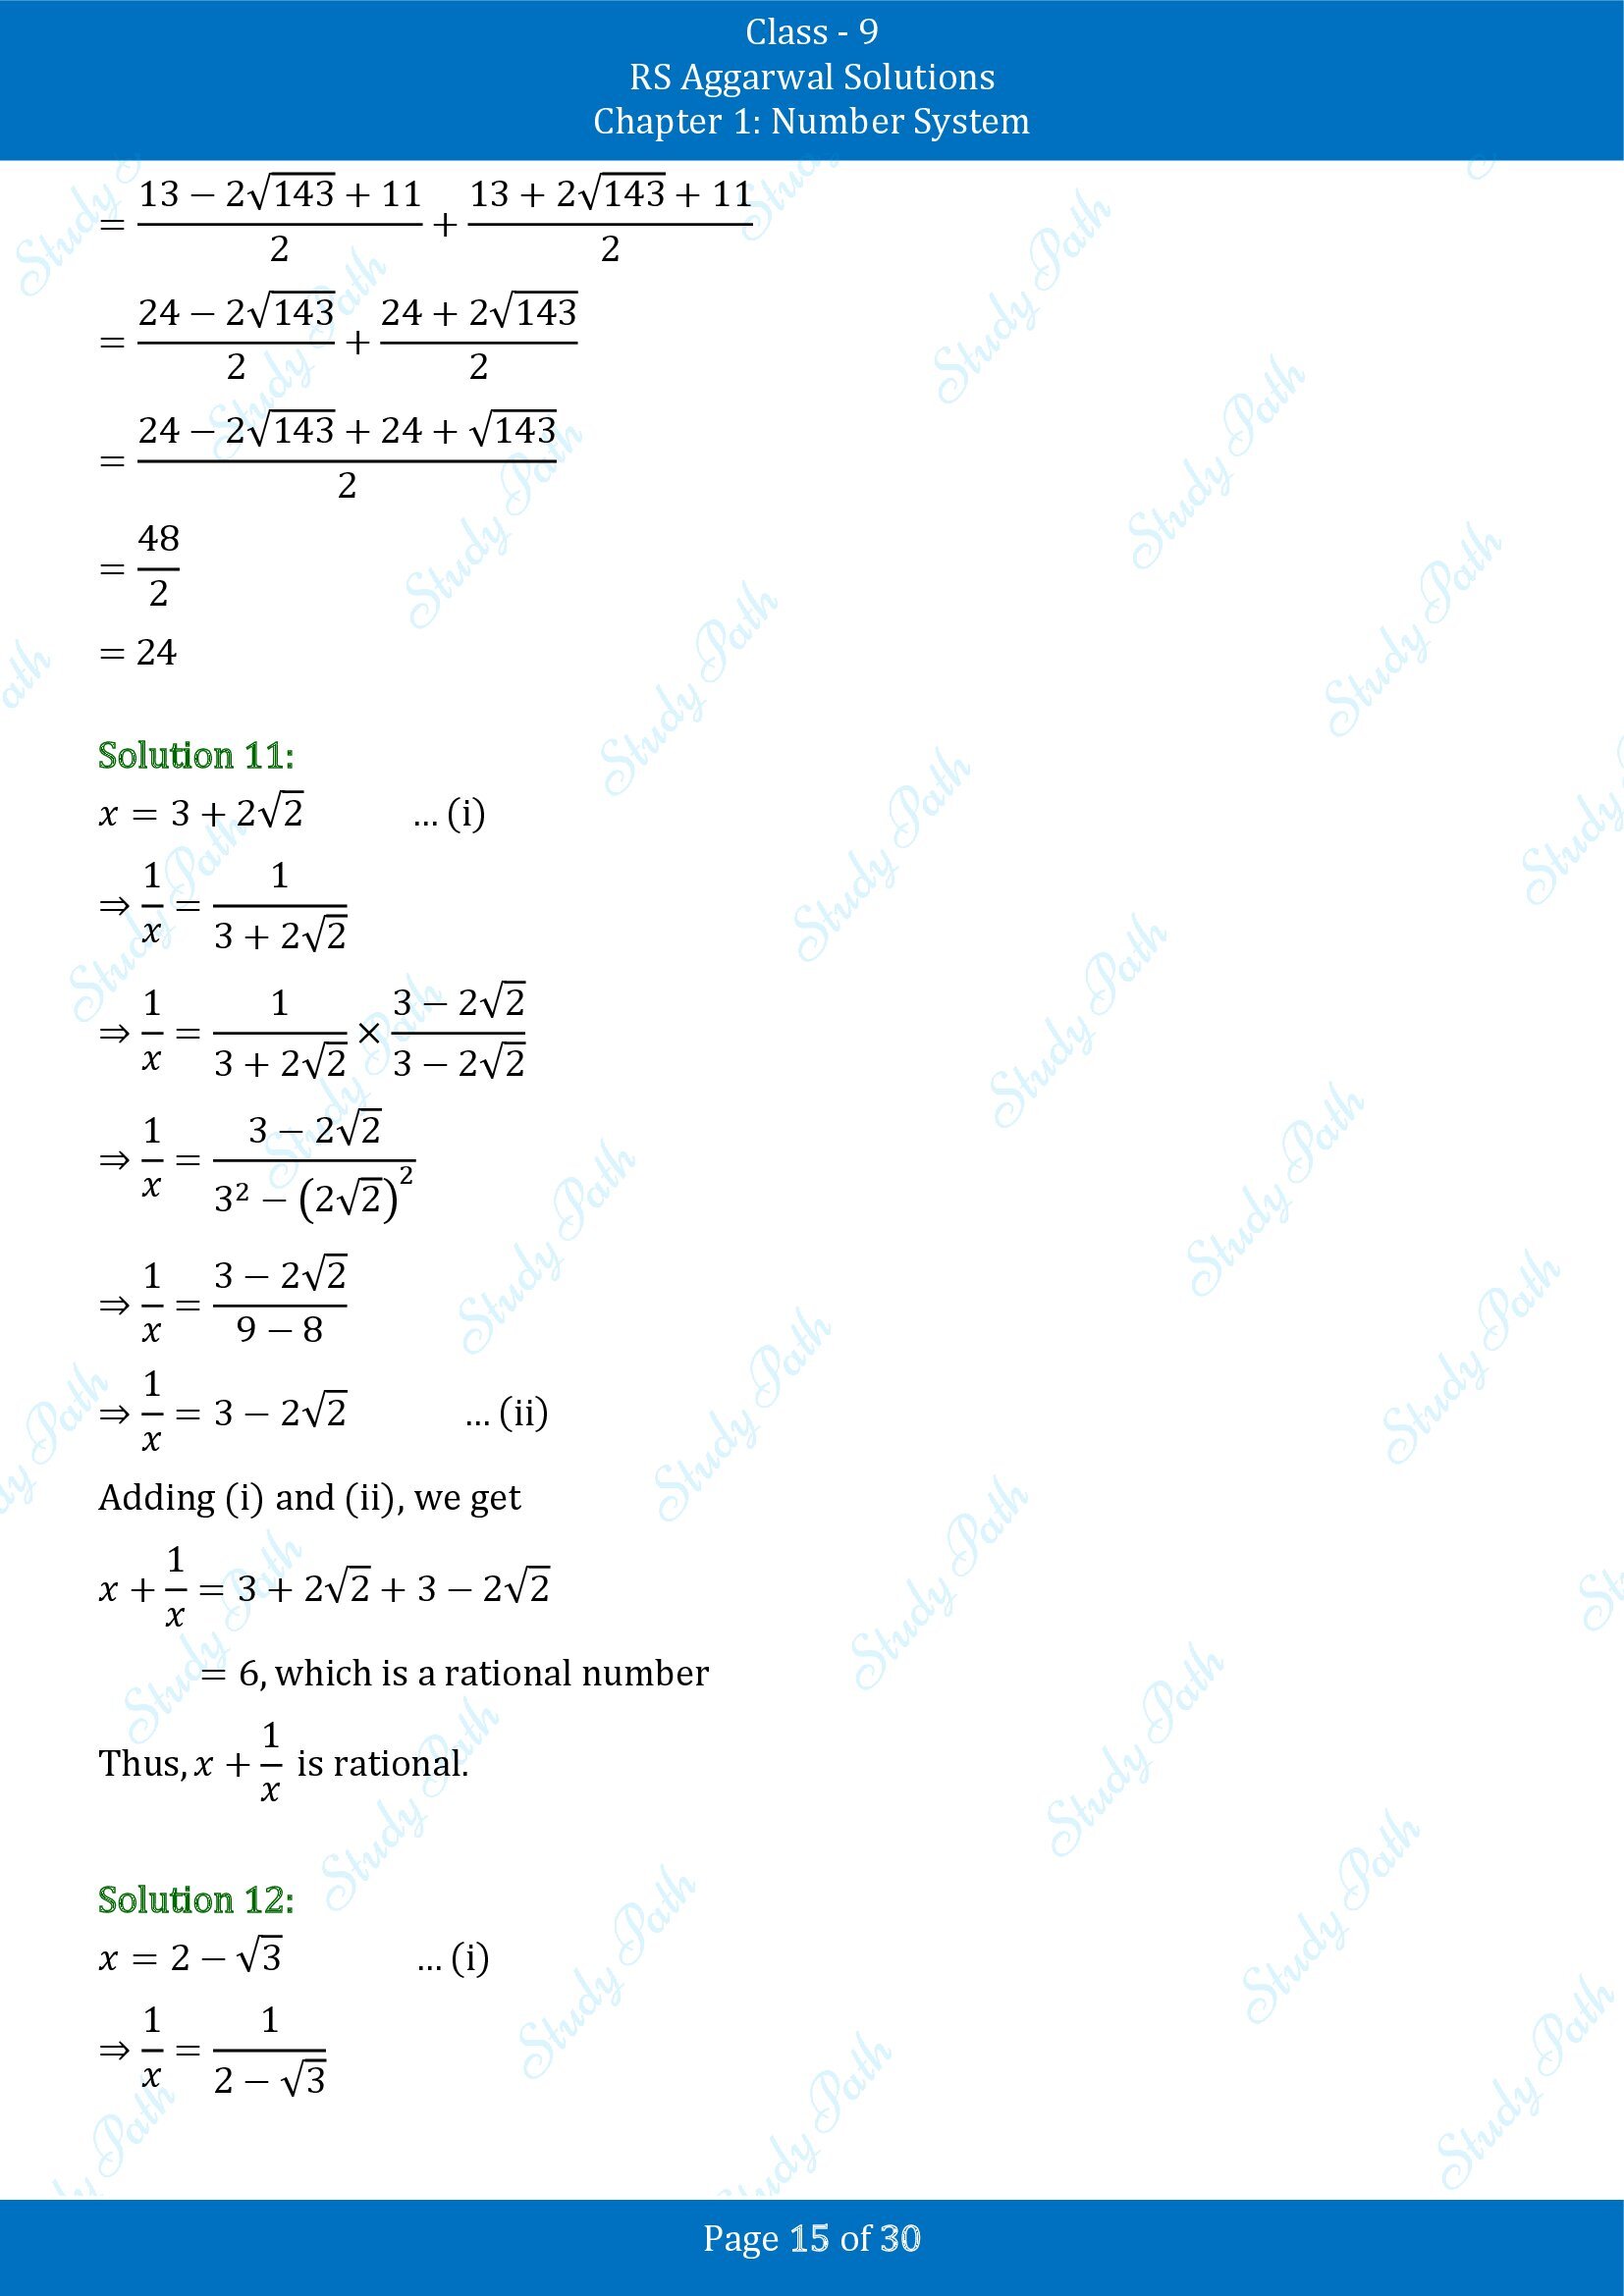 RS Aggarwal Solutions Class 9 Chapter 1 Number System Exercise 1F 00015